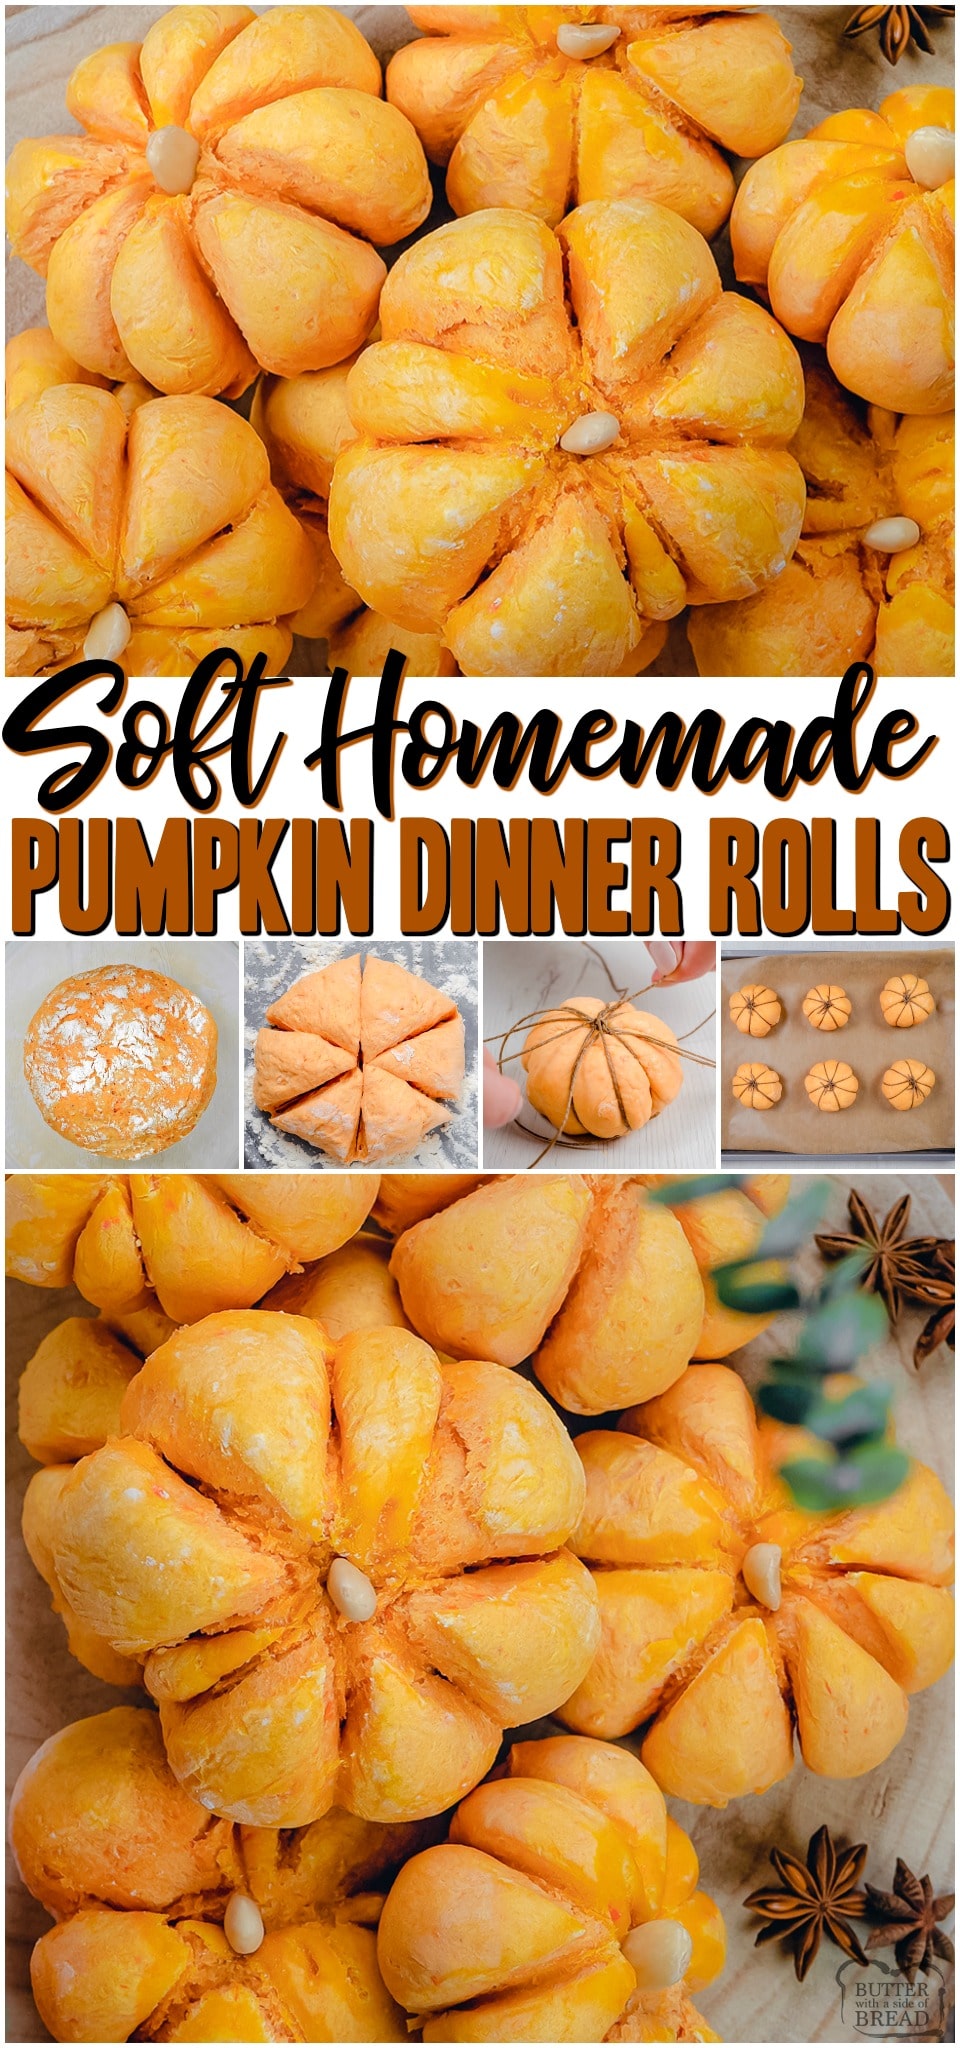 Pumpkin Dinner Rolls are soft & feathery homemade rolls that are shaped like pumpkins! Easy yeast dinner rolls made with pumpkin for a perfectly festive addition to dinner. #pumpkin #dinnerrolls #bread #yeast #Thanksgiving #Halloween #Fall #easyrecipe from BUTTER WITH A SIDE OF BREAD